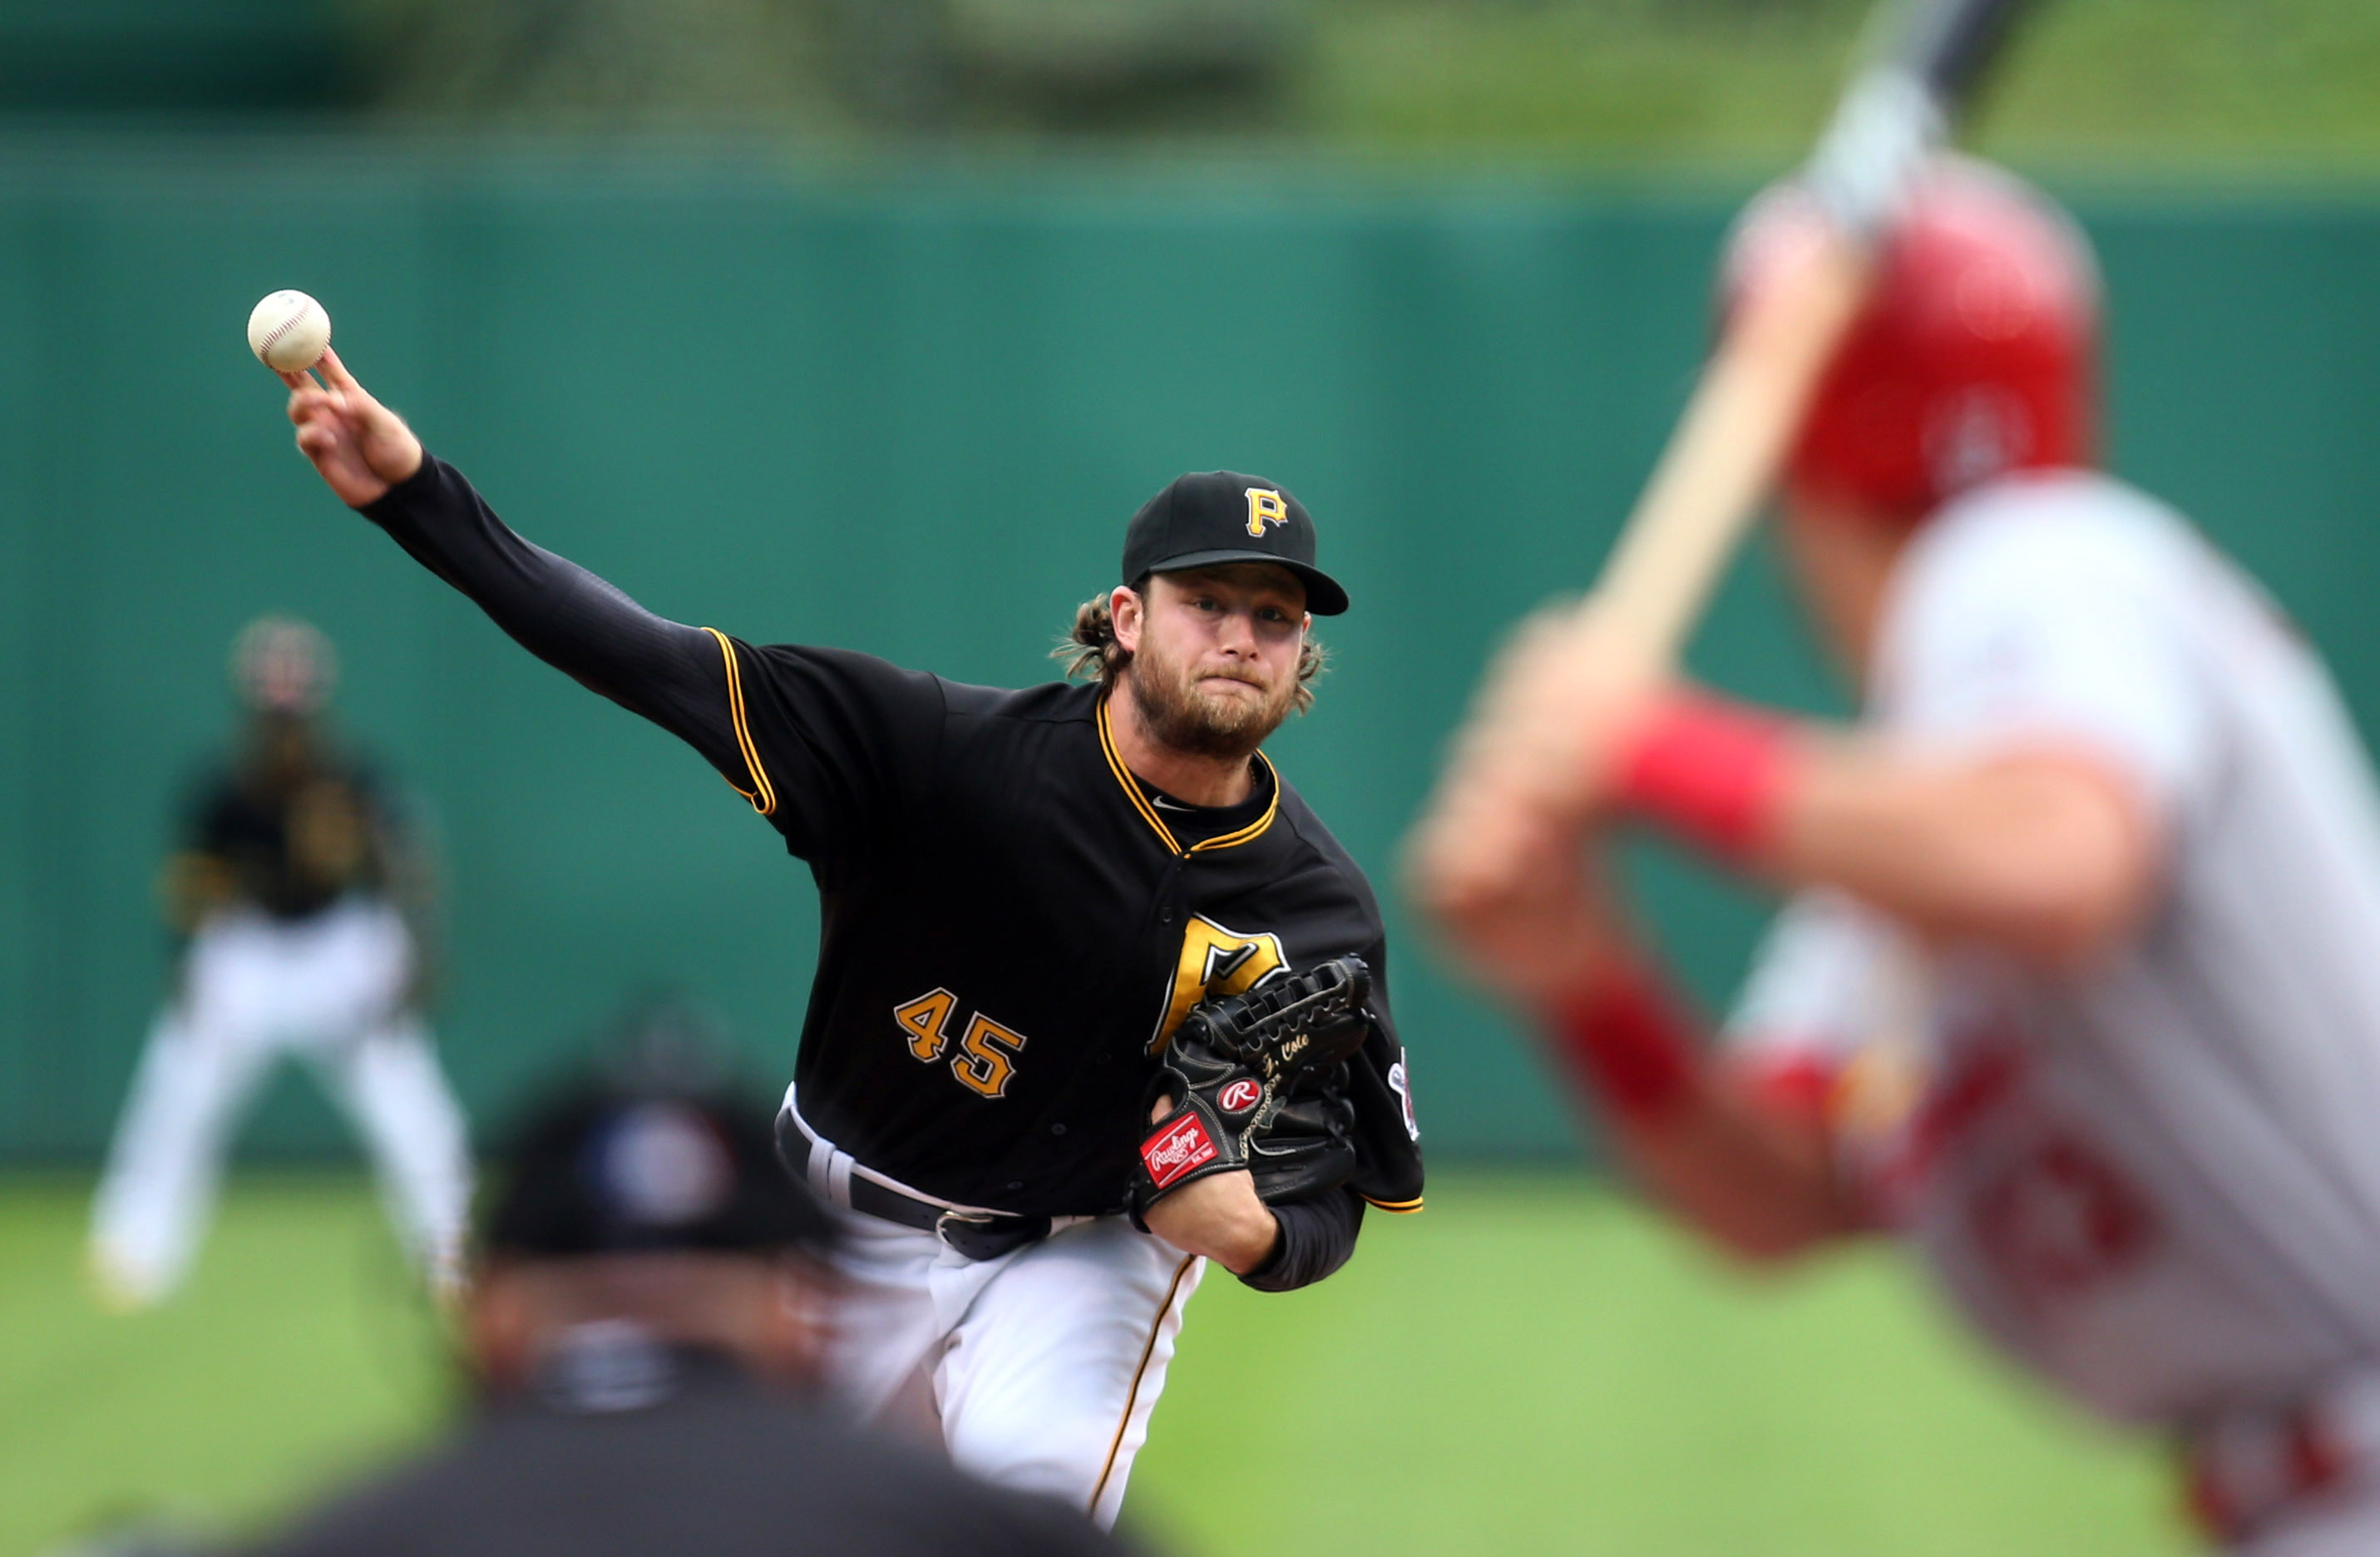 MLB: Game One-St. Louis Cardinals at Pittsburgh Pirates